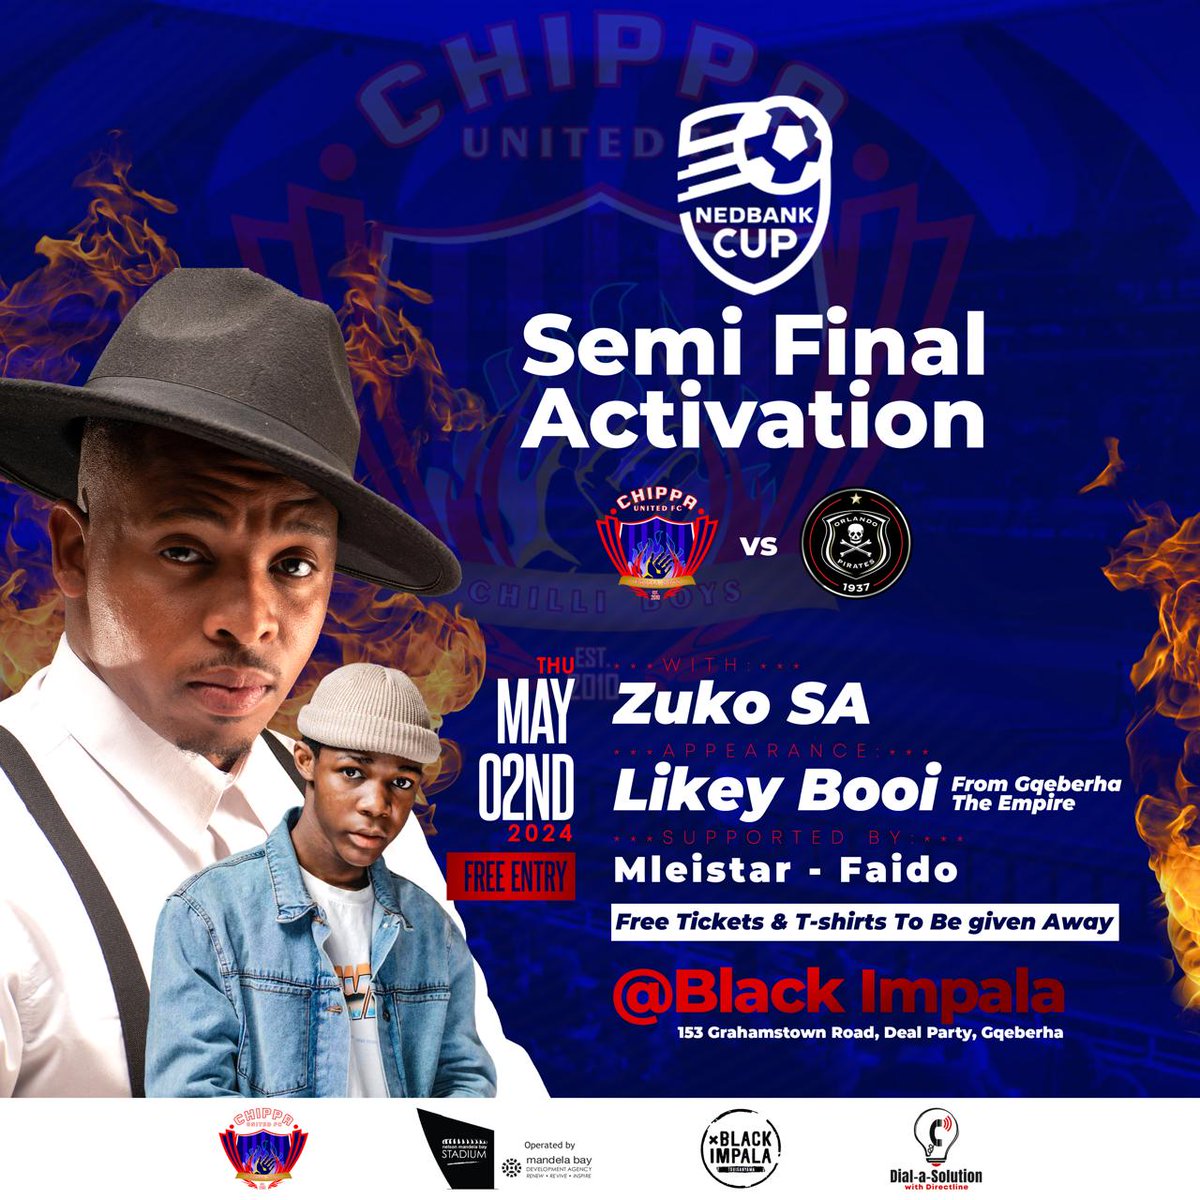 Come check out the Semifinal Activation at Black Impala tomorrow night and stand a chance to win tickets and shirts for the Nedbank Cup Semifinal between @orlandopirates and @ChippaUnitedFC taking place at the @NMB_Stadium 4 May 2024.